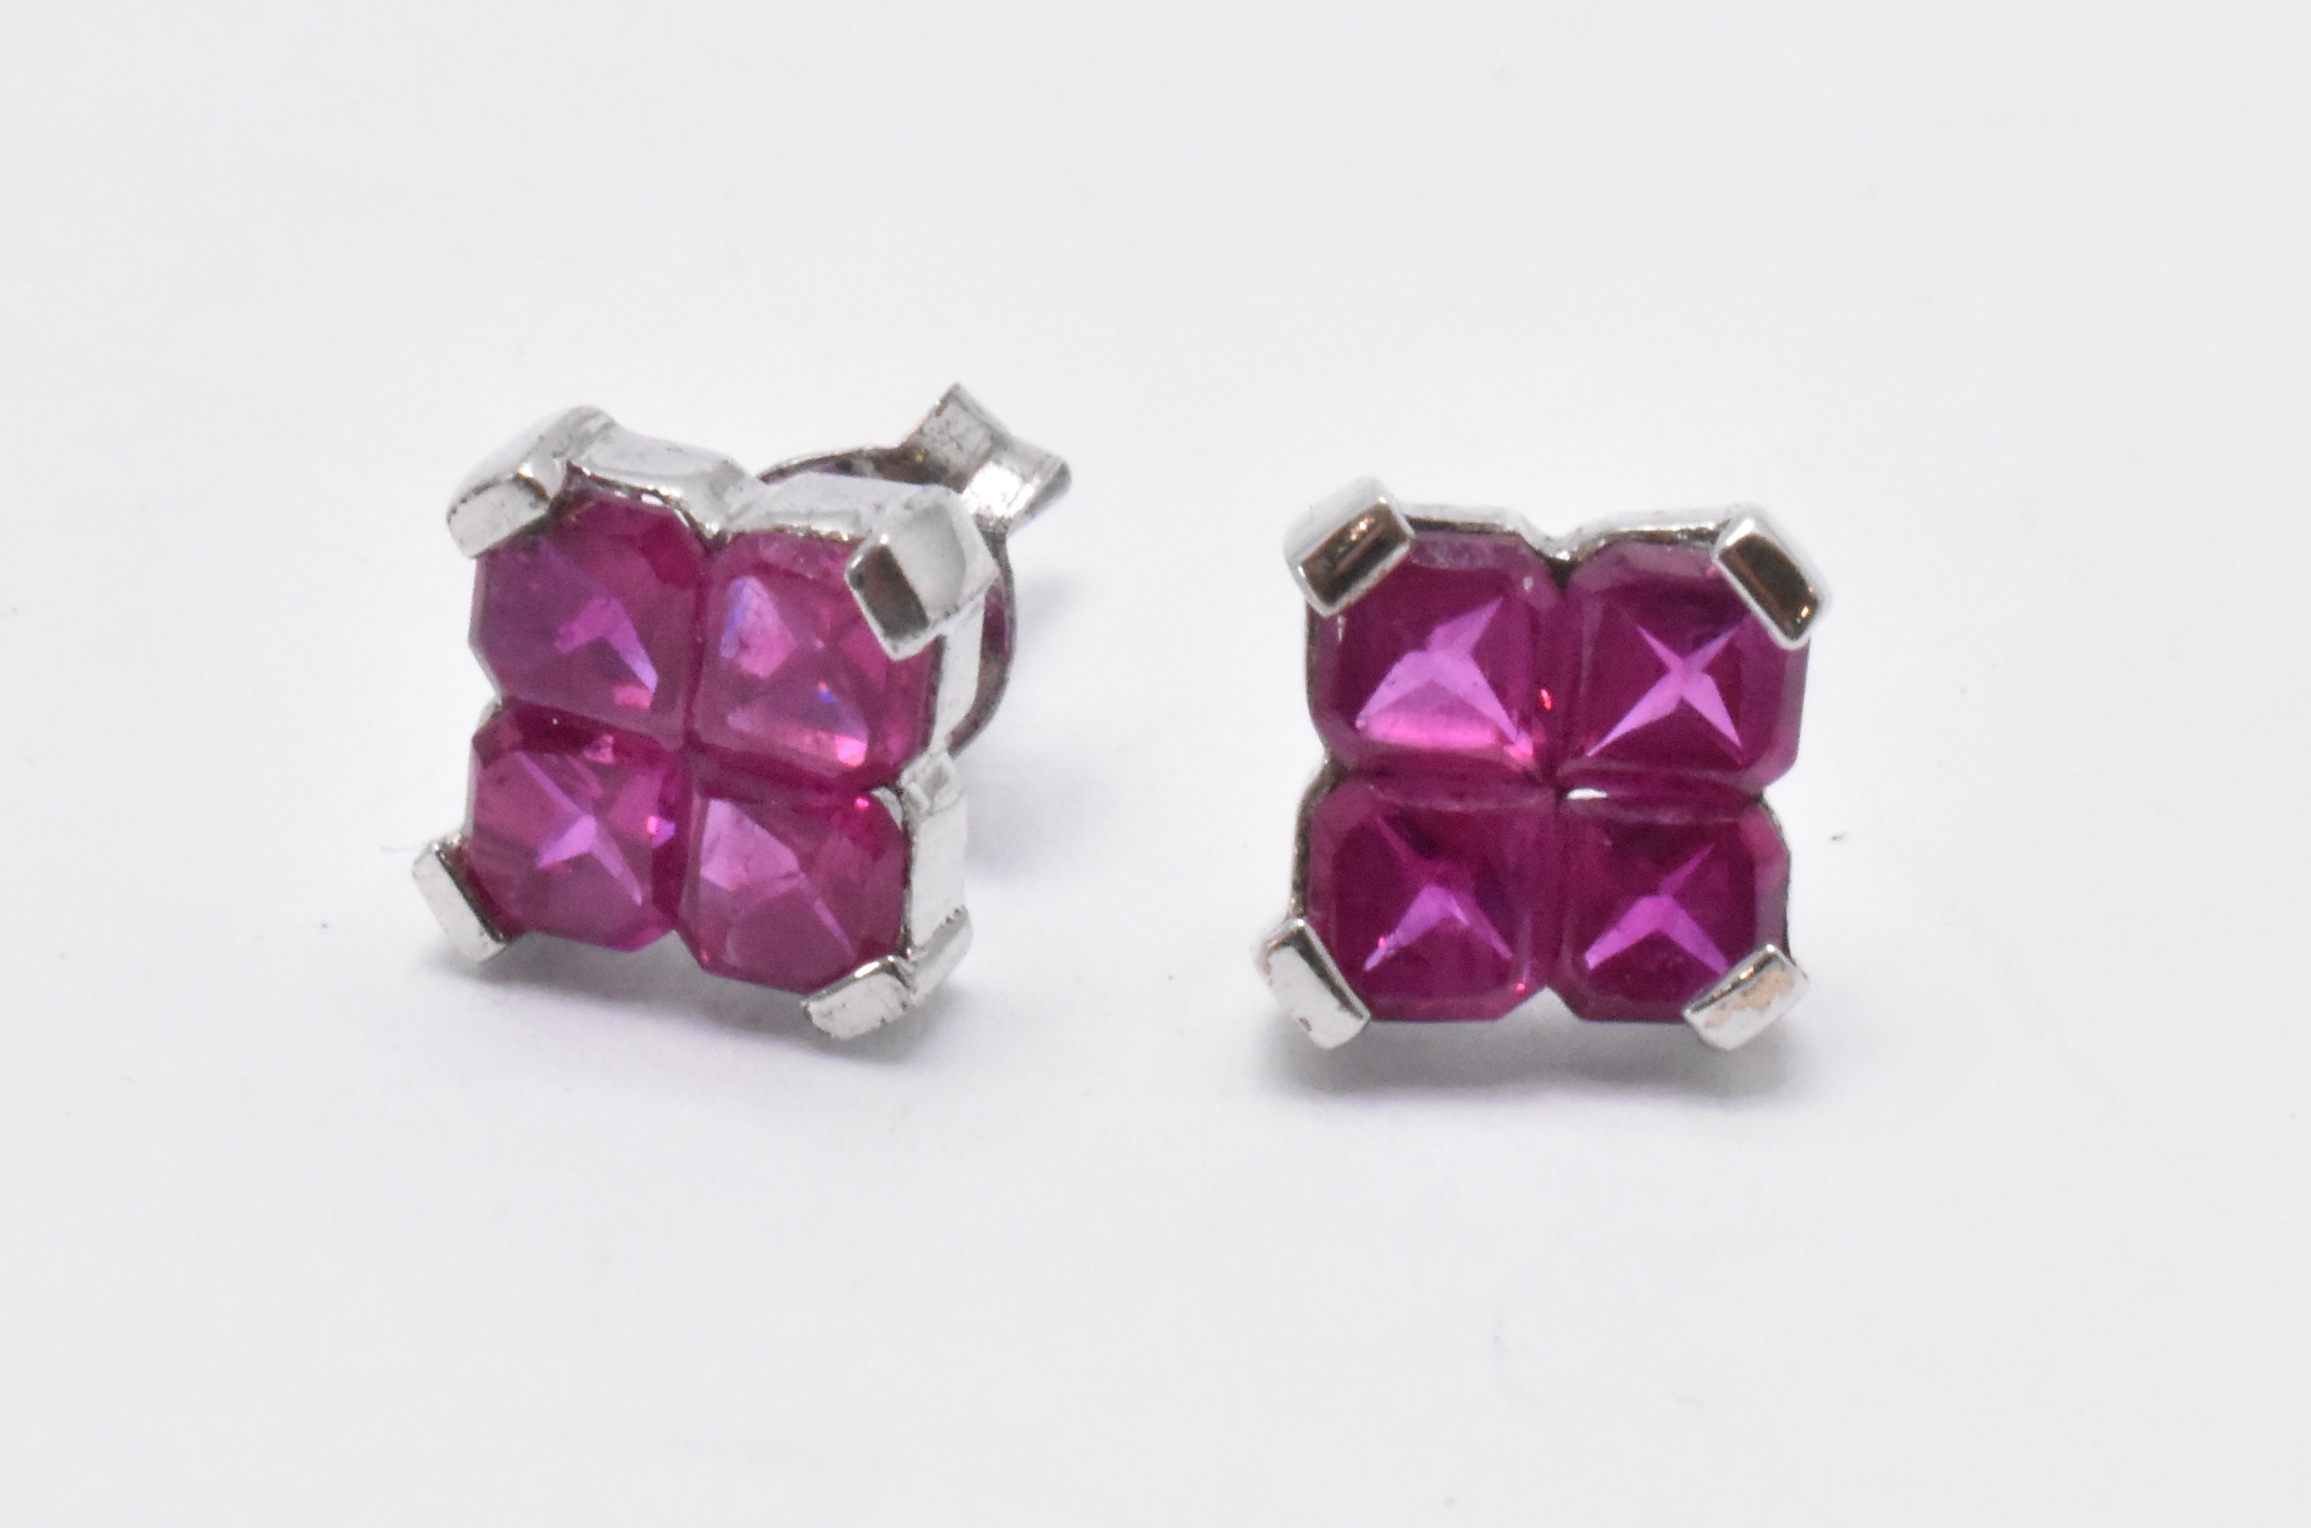 PAIR 9CT WHITE GOLD AND RUBY STUD EARRINGS